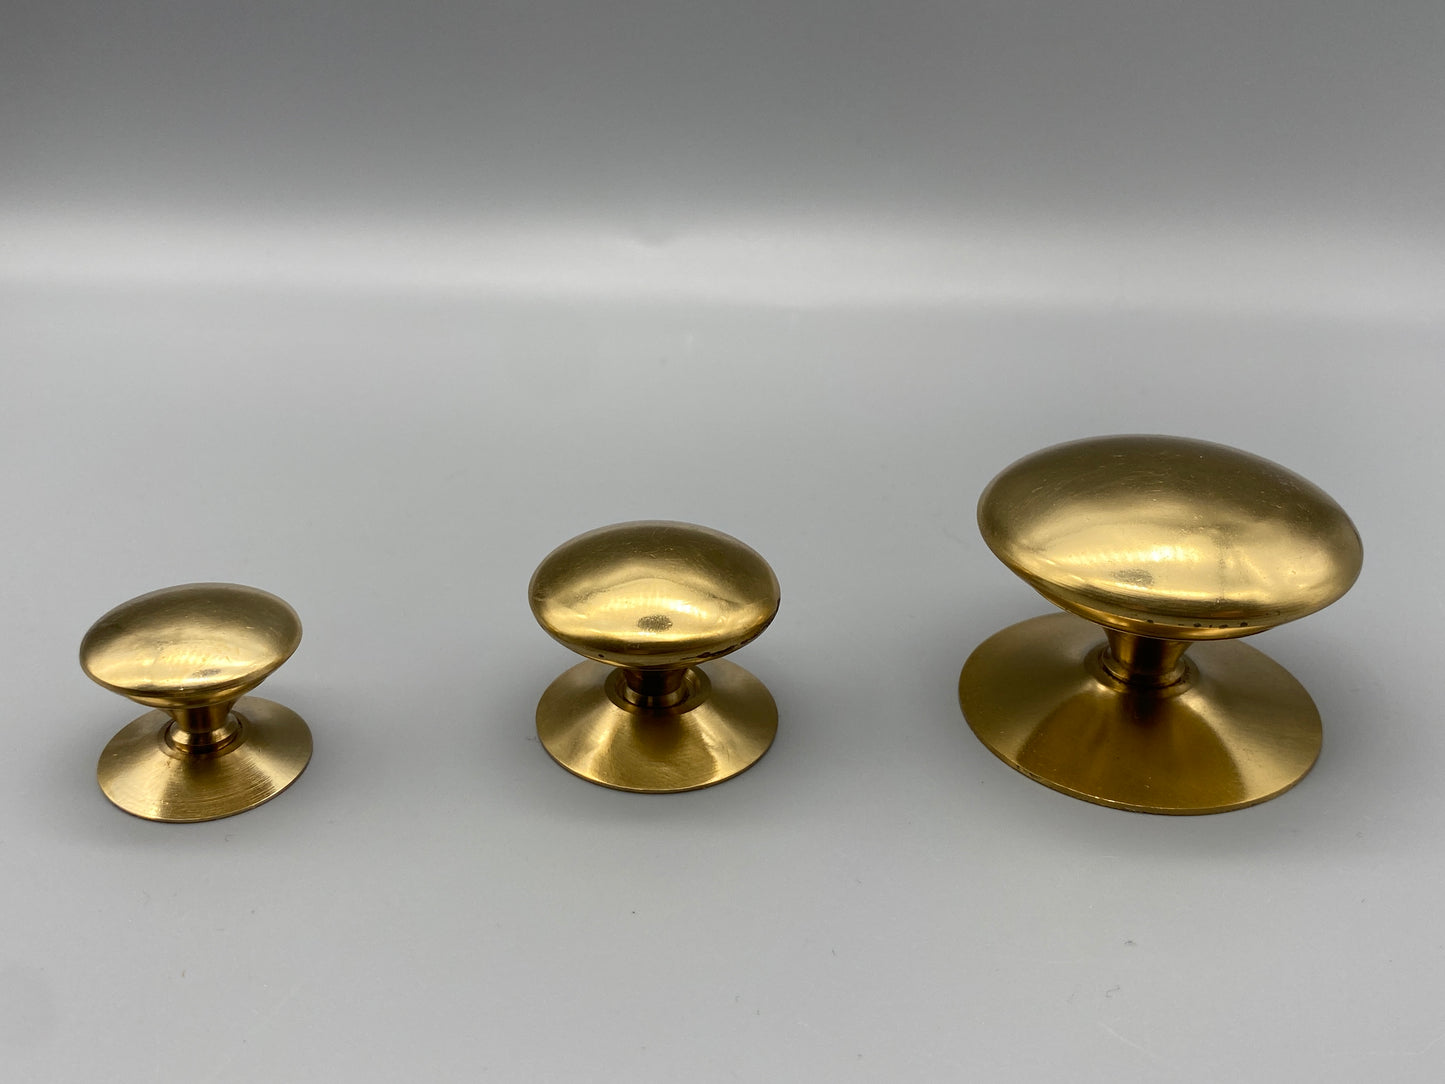 Solid Brass Victorian Polished Knobs - Sizes from 13mm - 50mm Diameter